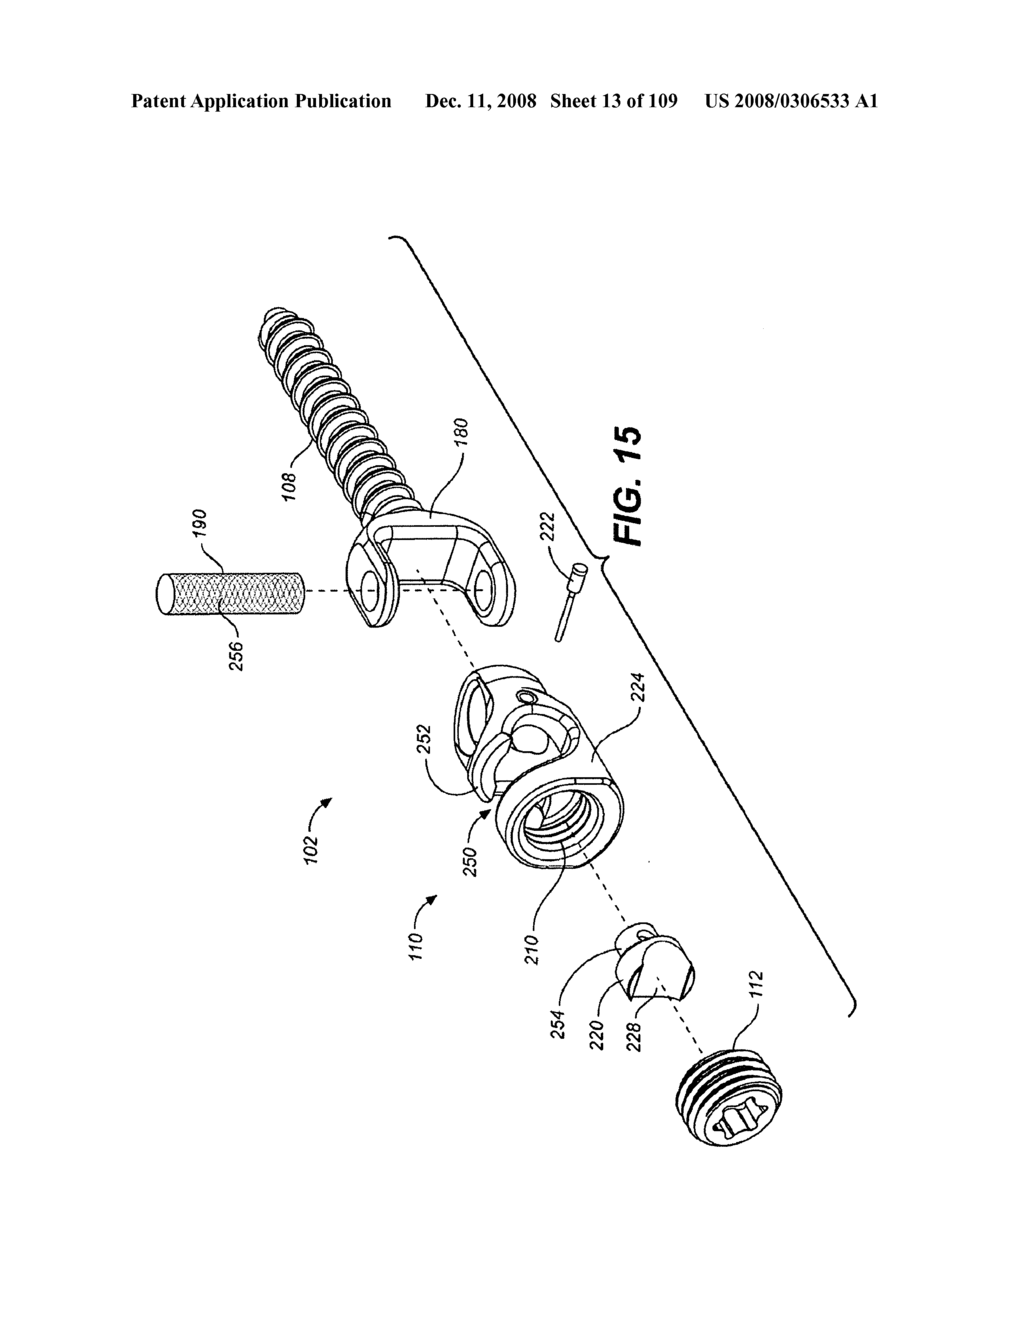 DEFLECTION ROD SYSTEM FOR USE WITH A VERTEBRAL FUSION IMPLANT FOR DYNAMIC STABILIZATION AND MOTION PRESERVATION SPINAL IMPLANTATION SYSTEM AND METHOD - diagram, schematic, and image 14